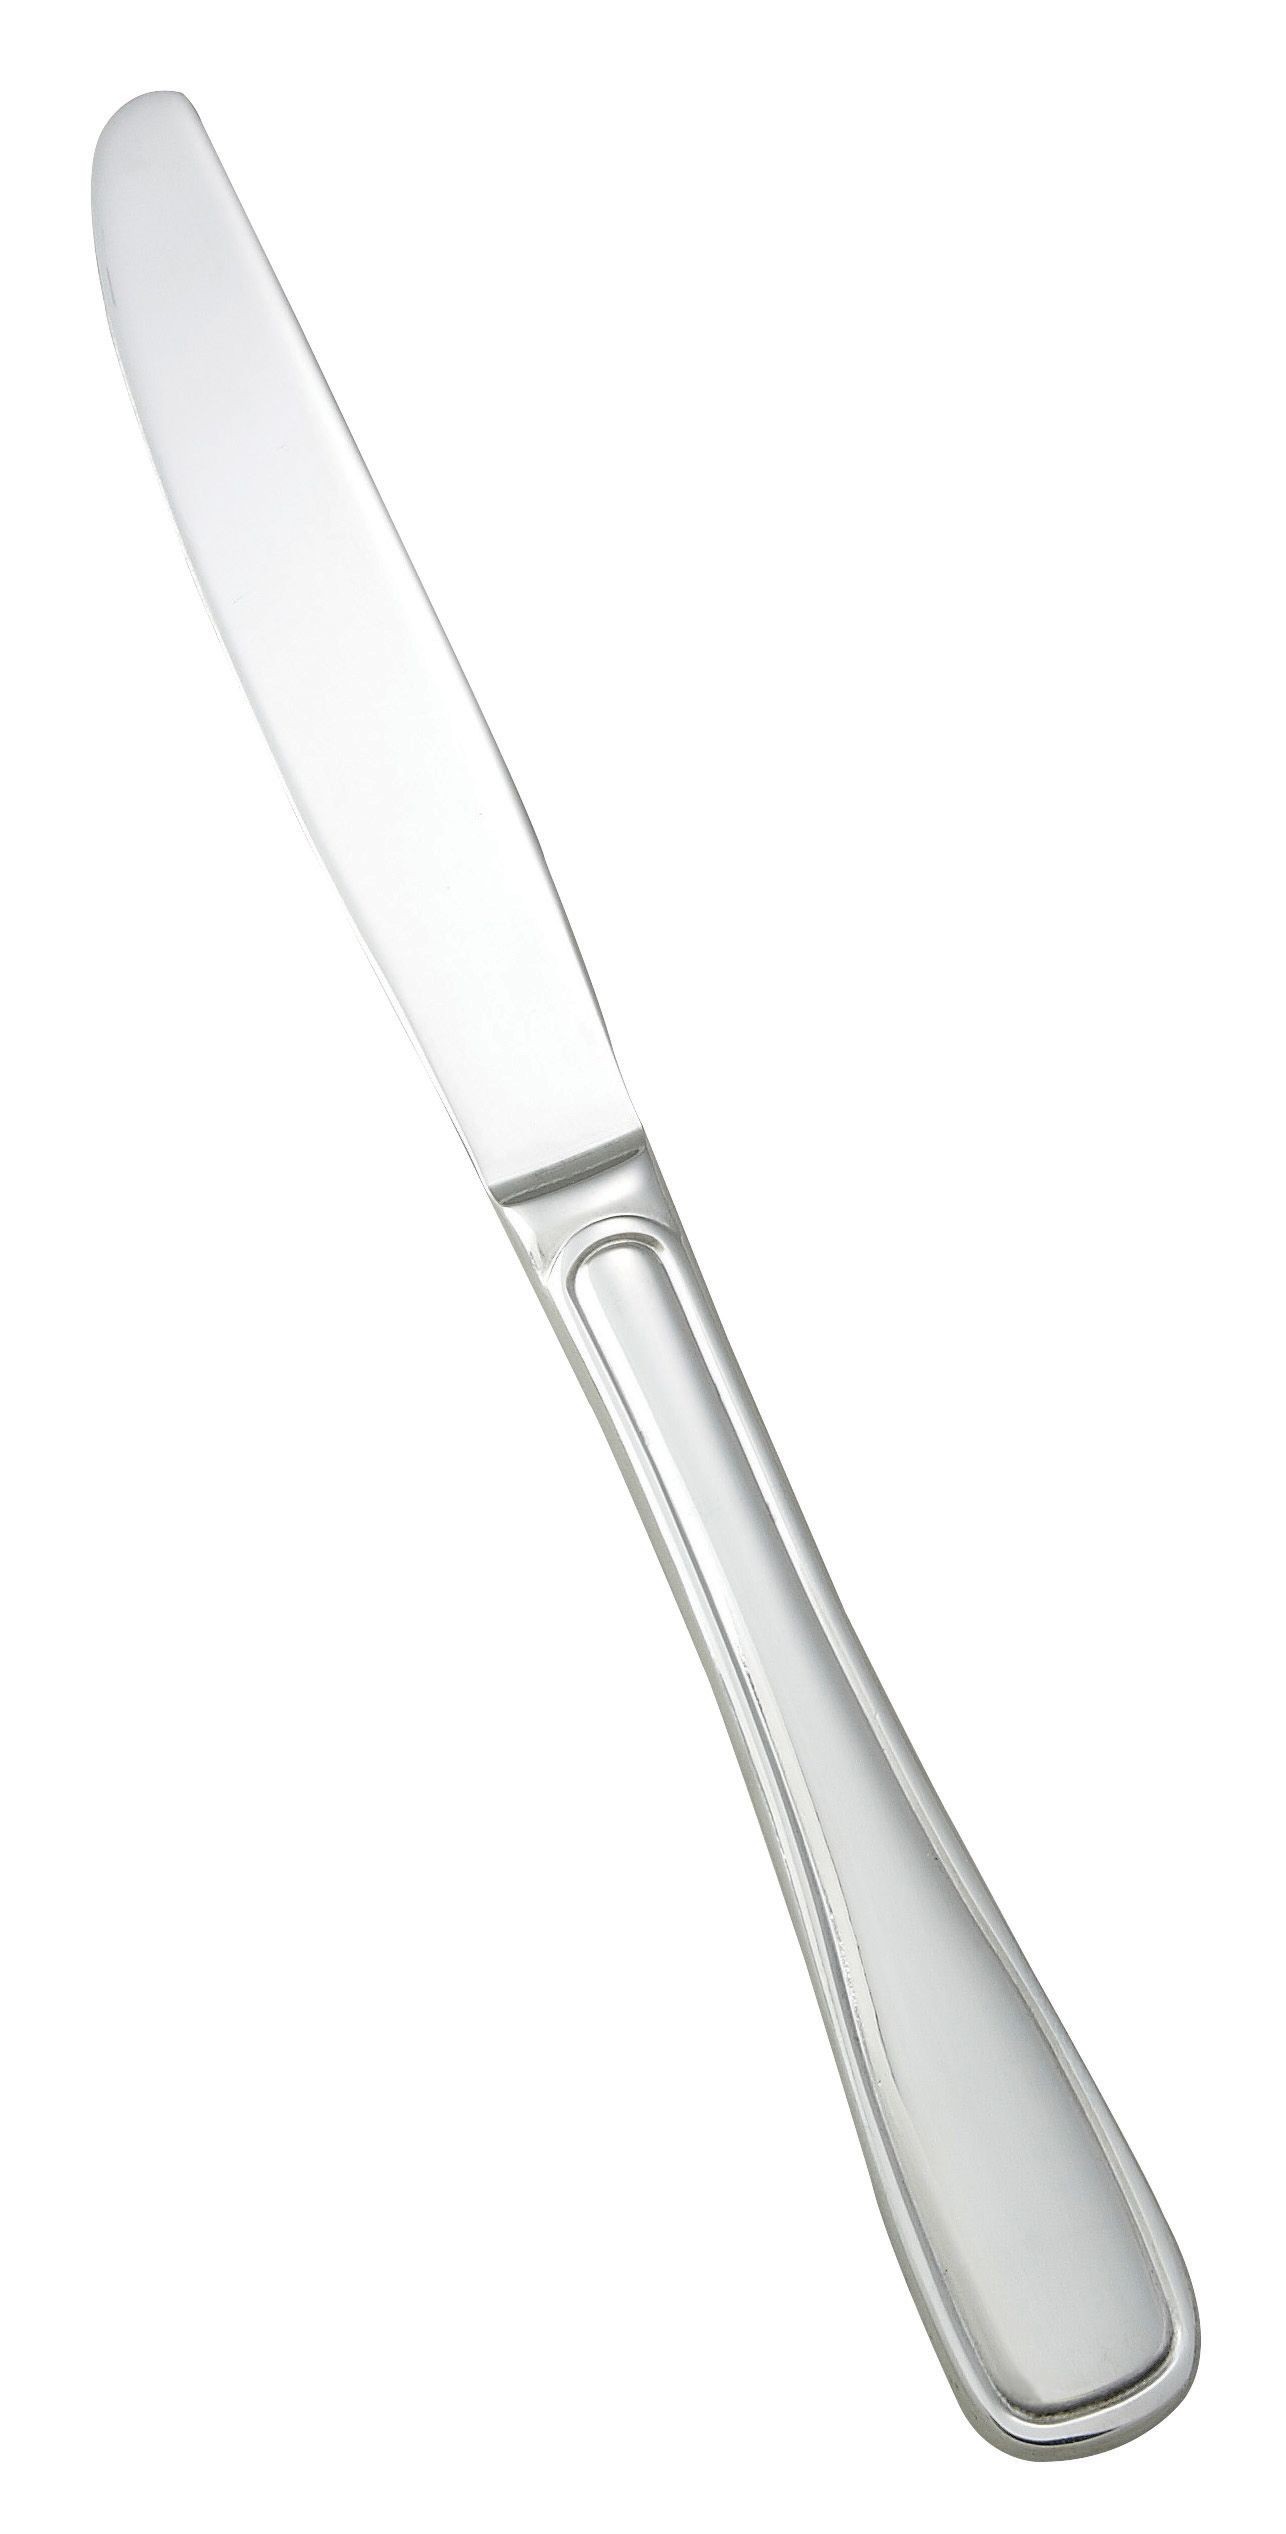 Winco 0033-08 Oxford Extra Heavy Stainless Steel Dinner Knife (12/Pack)